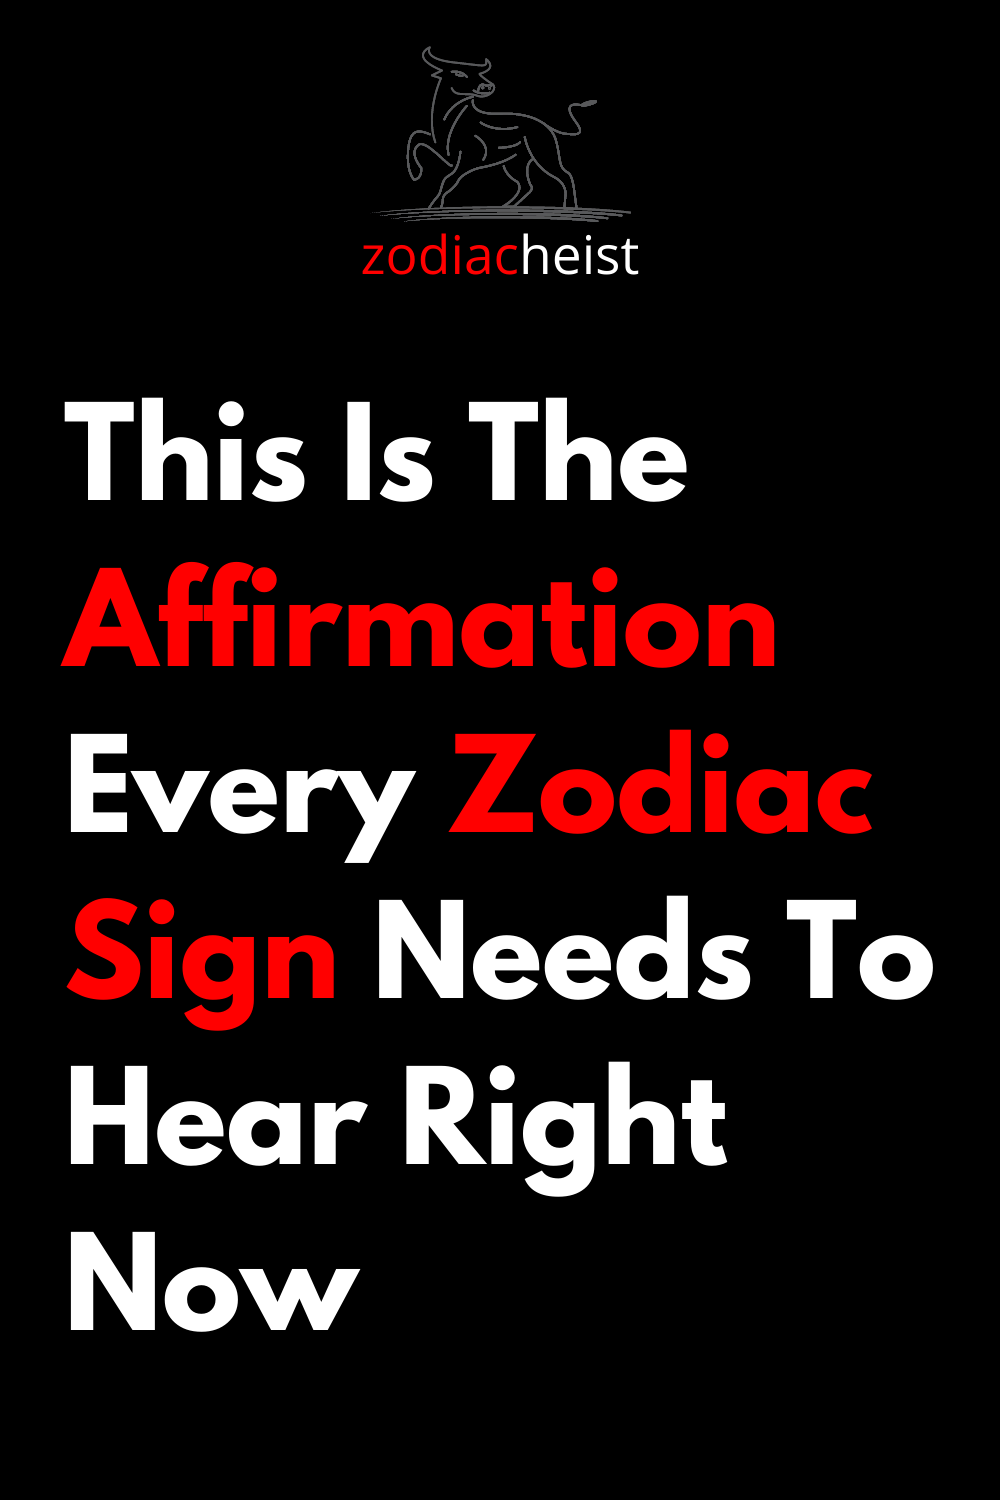 This Is The Affirmation Every Zodiac Sign Needs To Hear Right Now